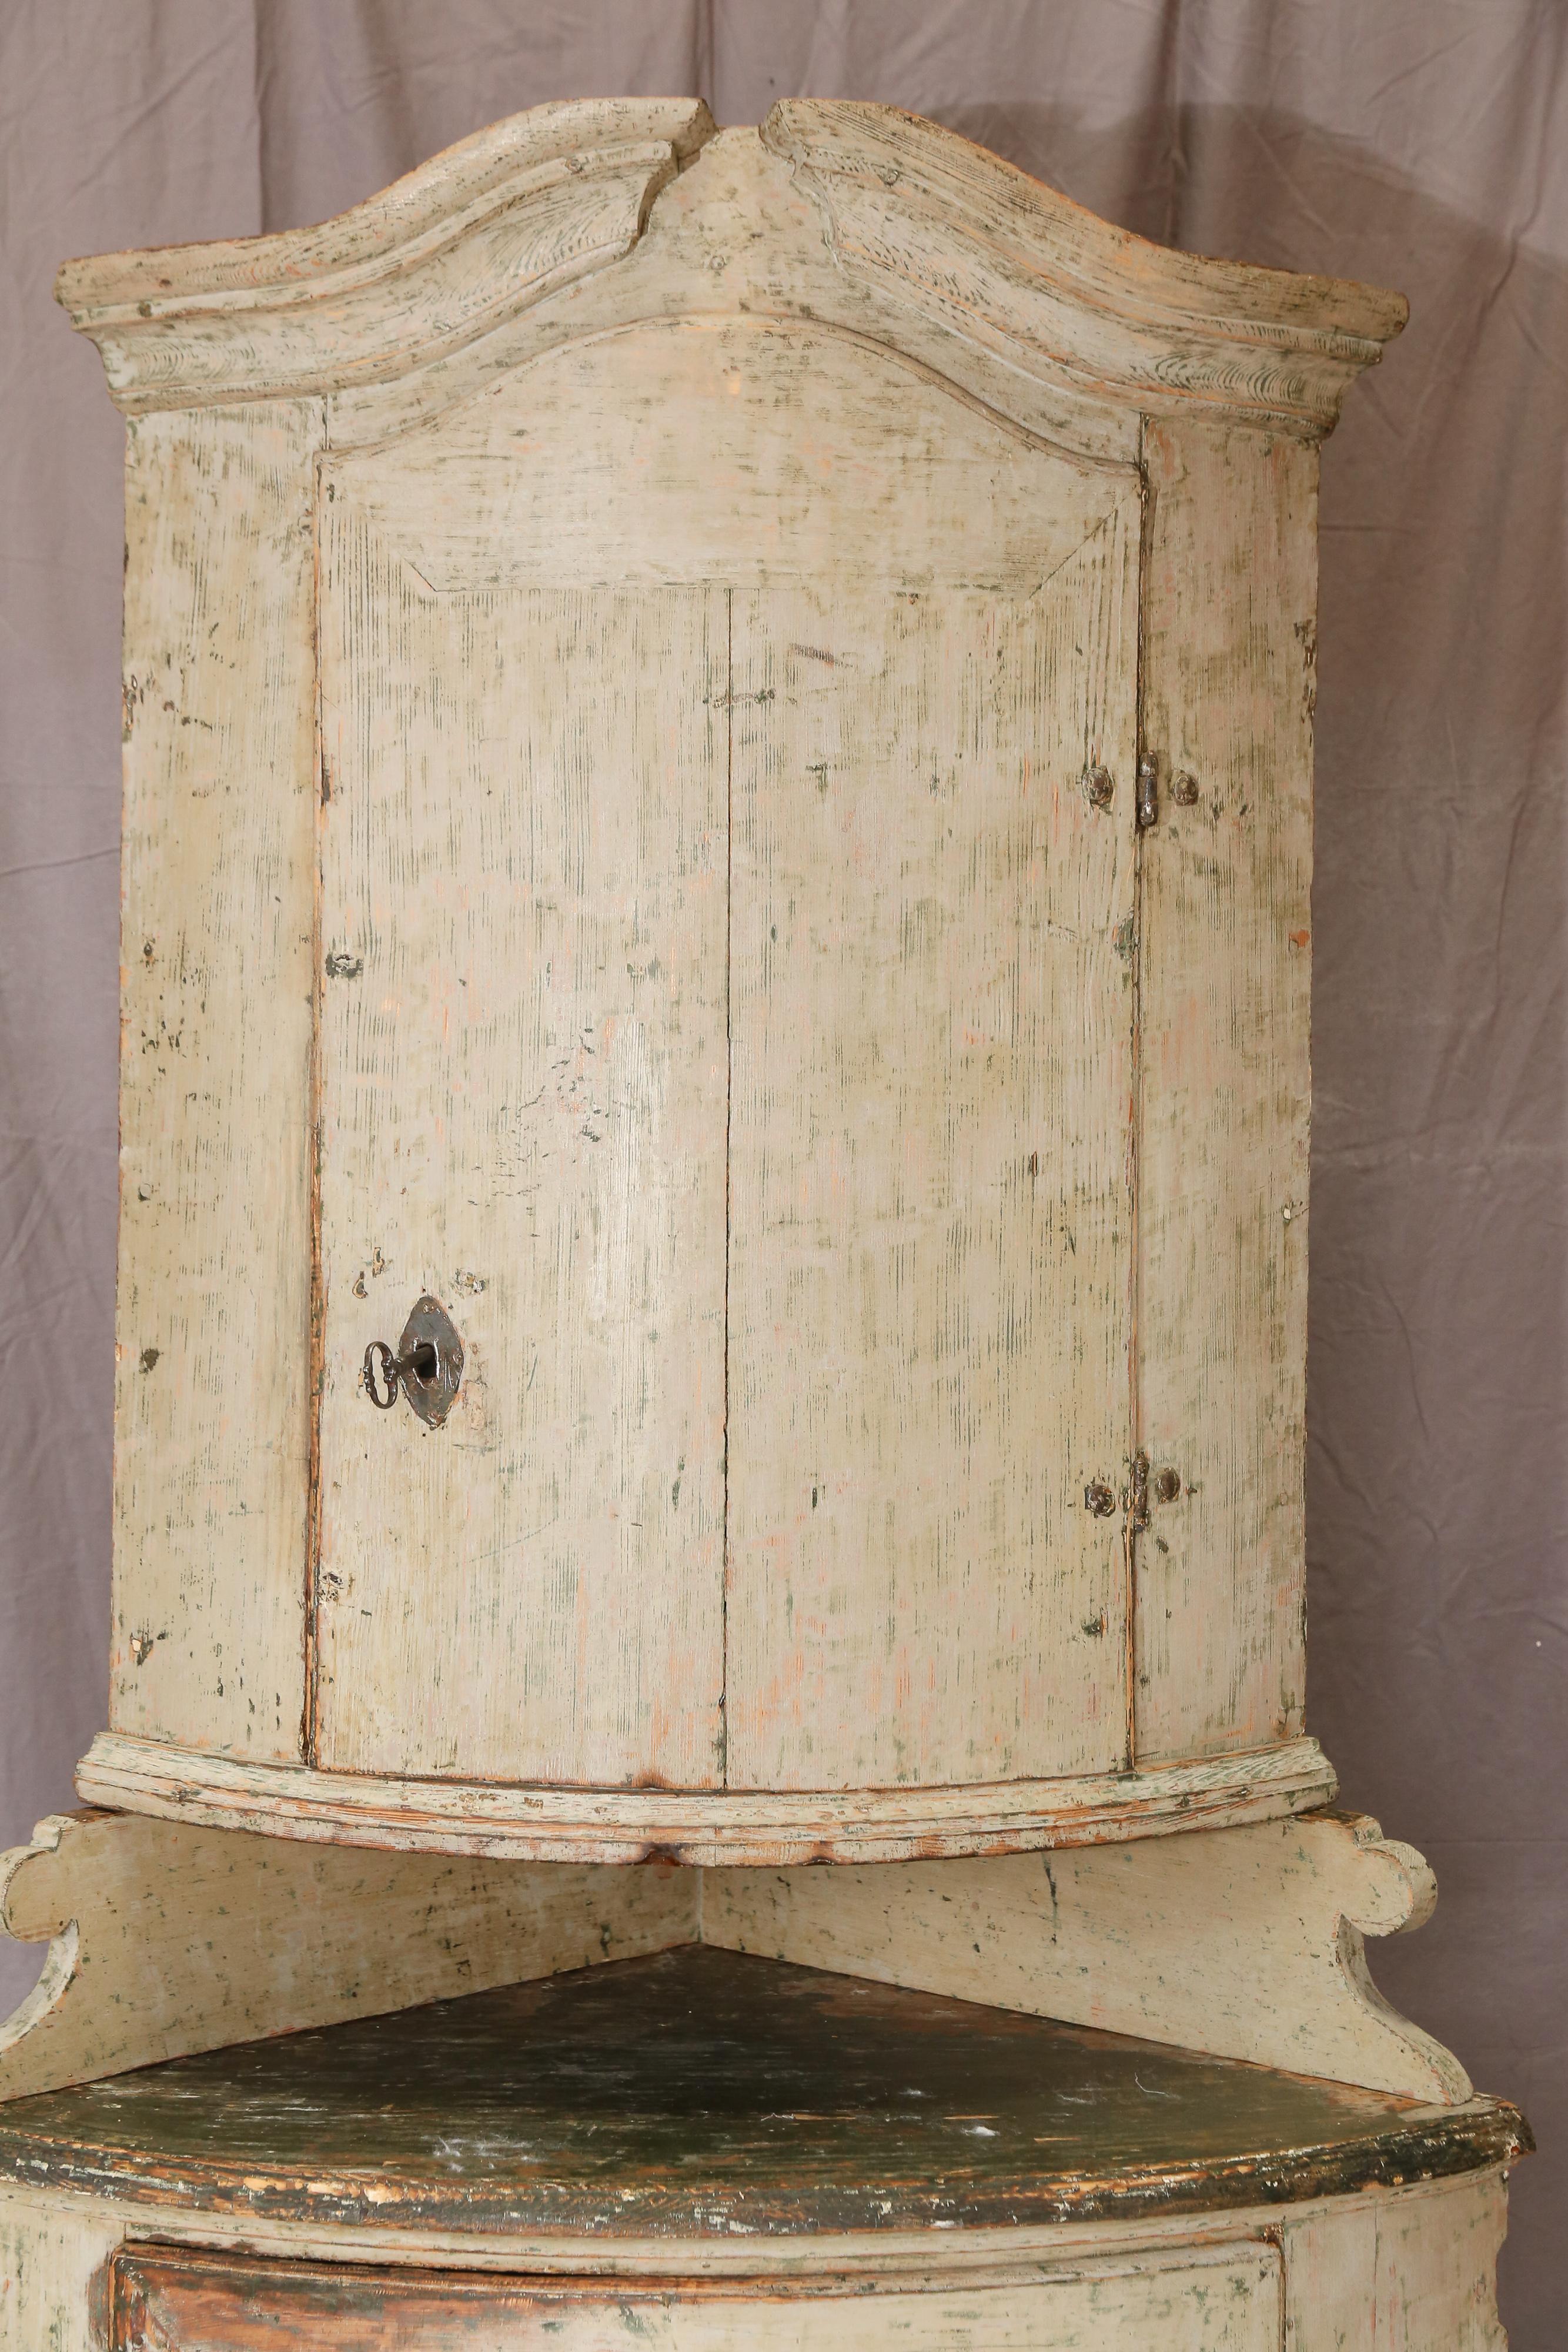 18th century Swedish Gustavian Corner deux corps. Original paint both on the outside and the inside. Inside is light blue. Outside is a muted grayish white. Charming piece! The top piece rests on a 90 degree angled carved spacer. Left side depth: